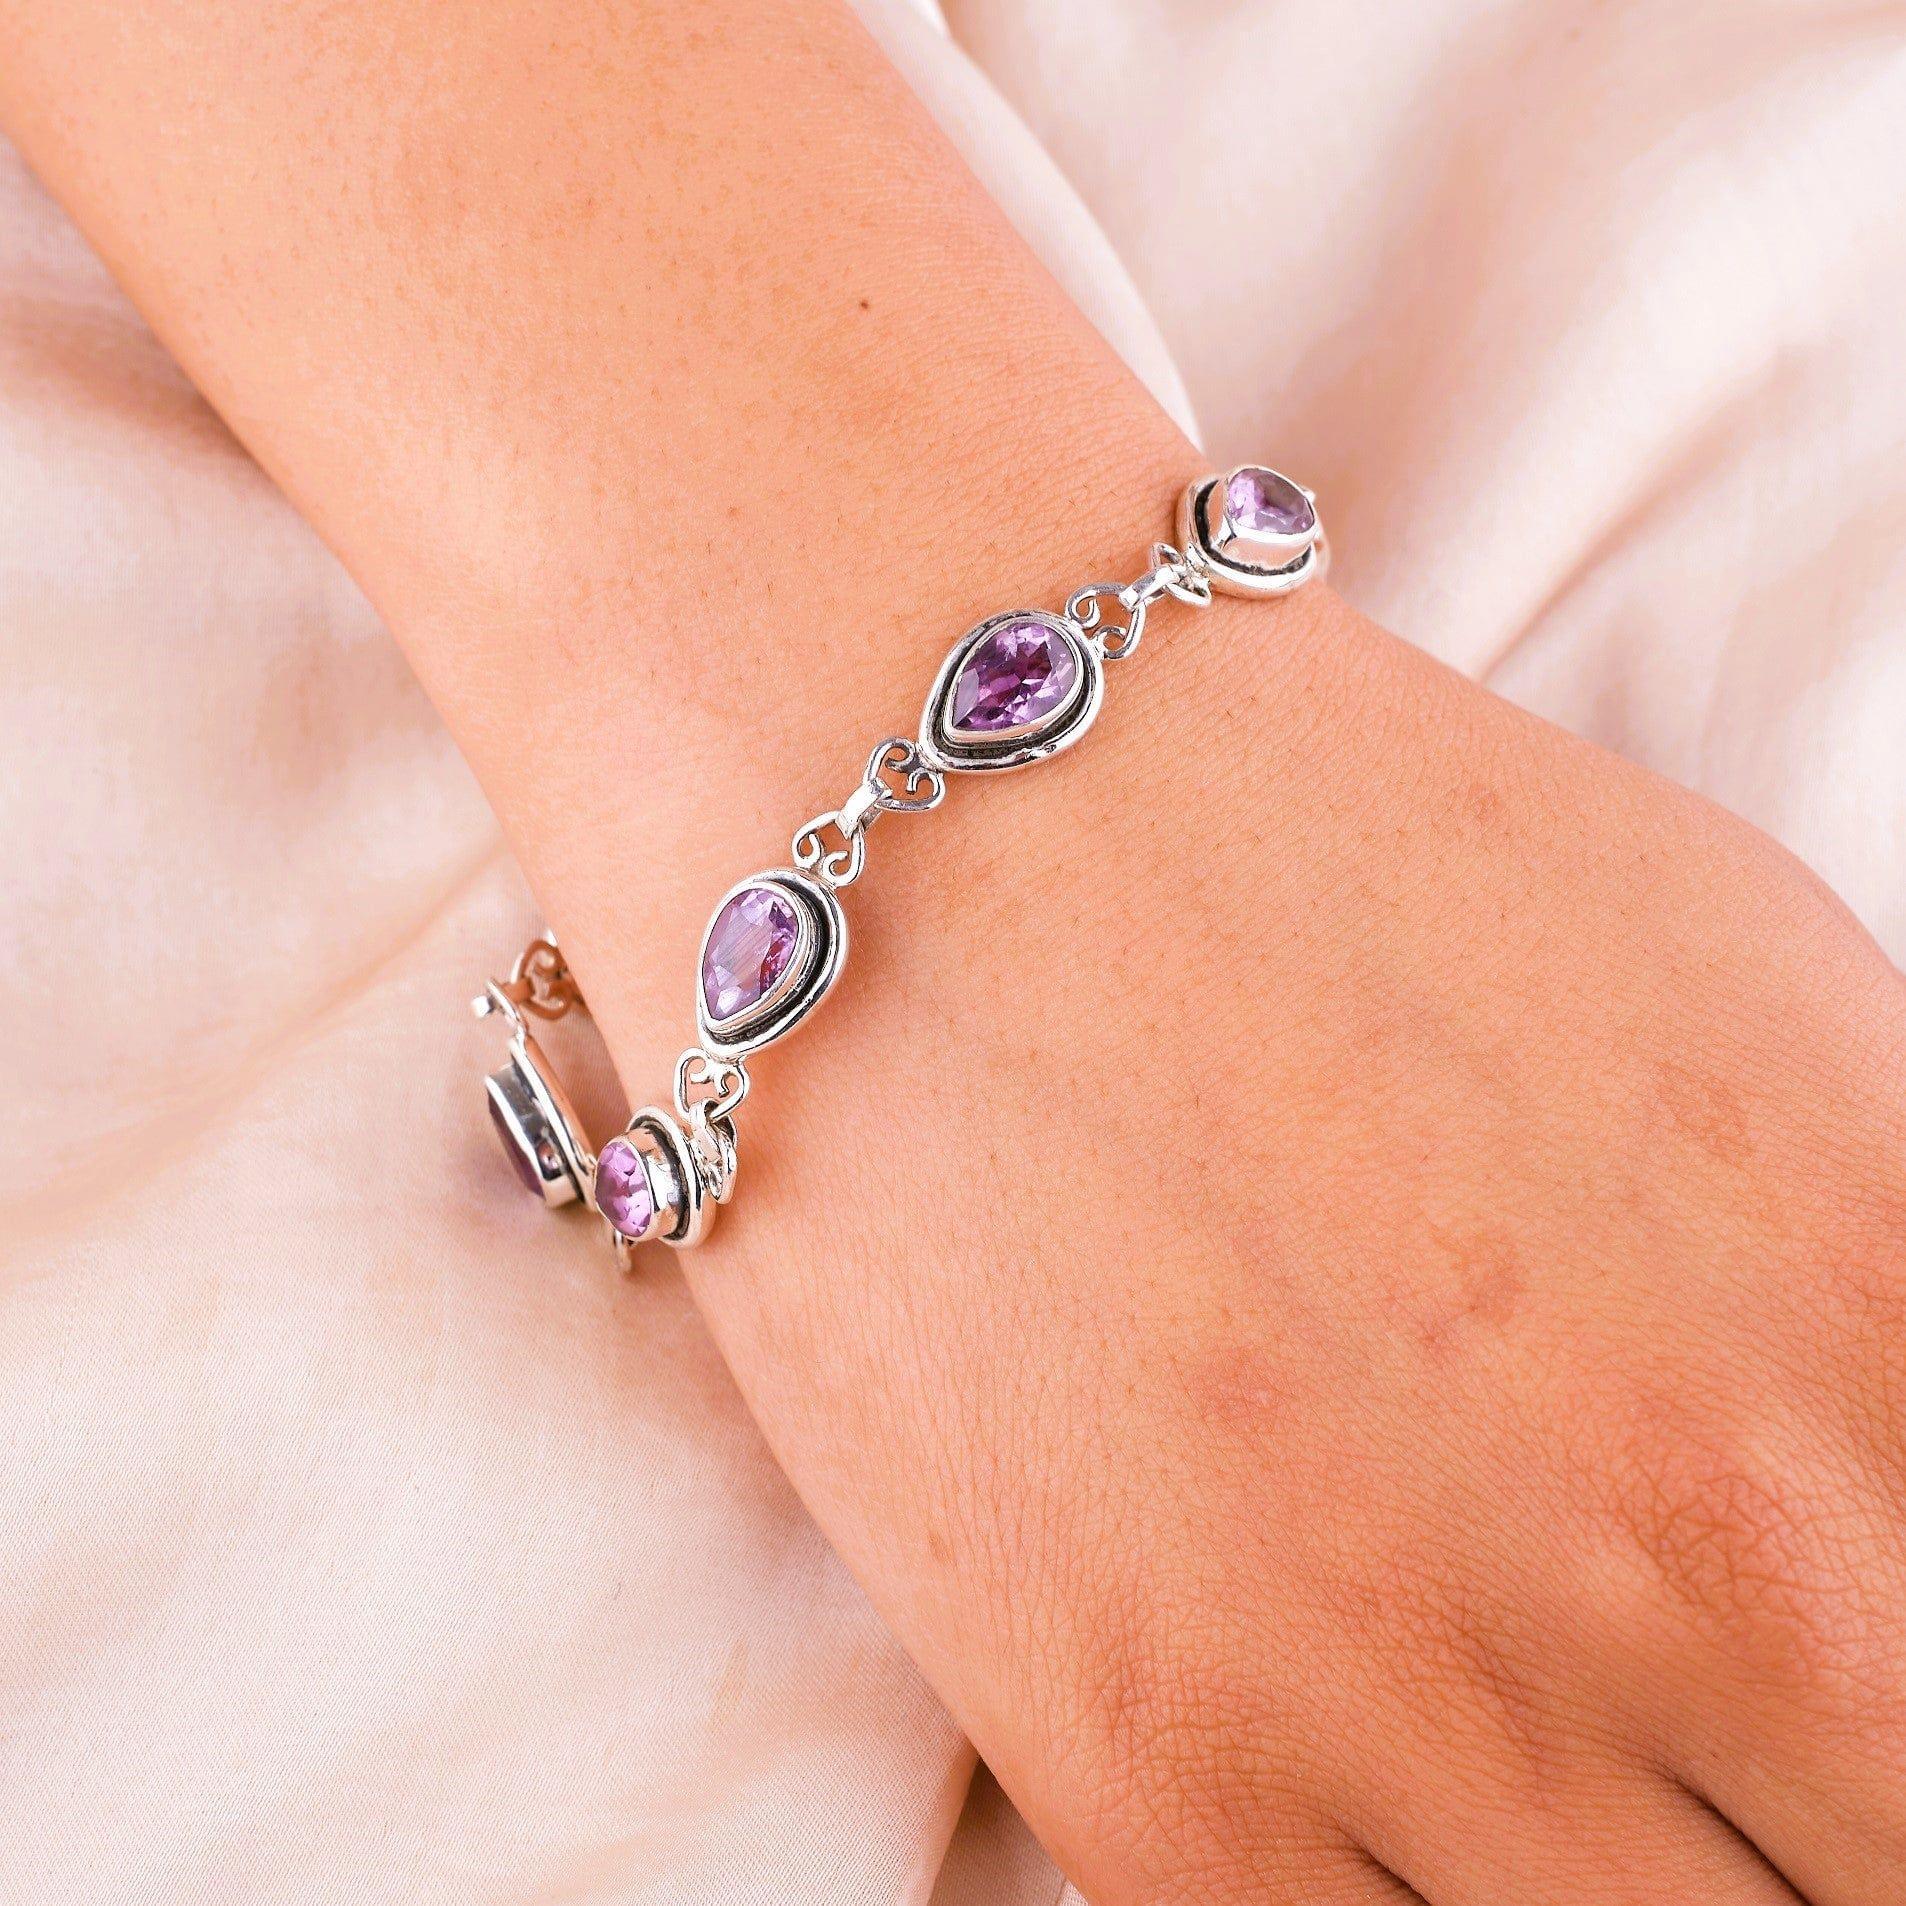 Amethyst Chip Bracelet for Anxiety - Solacely